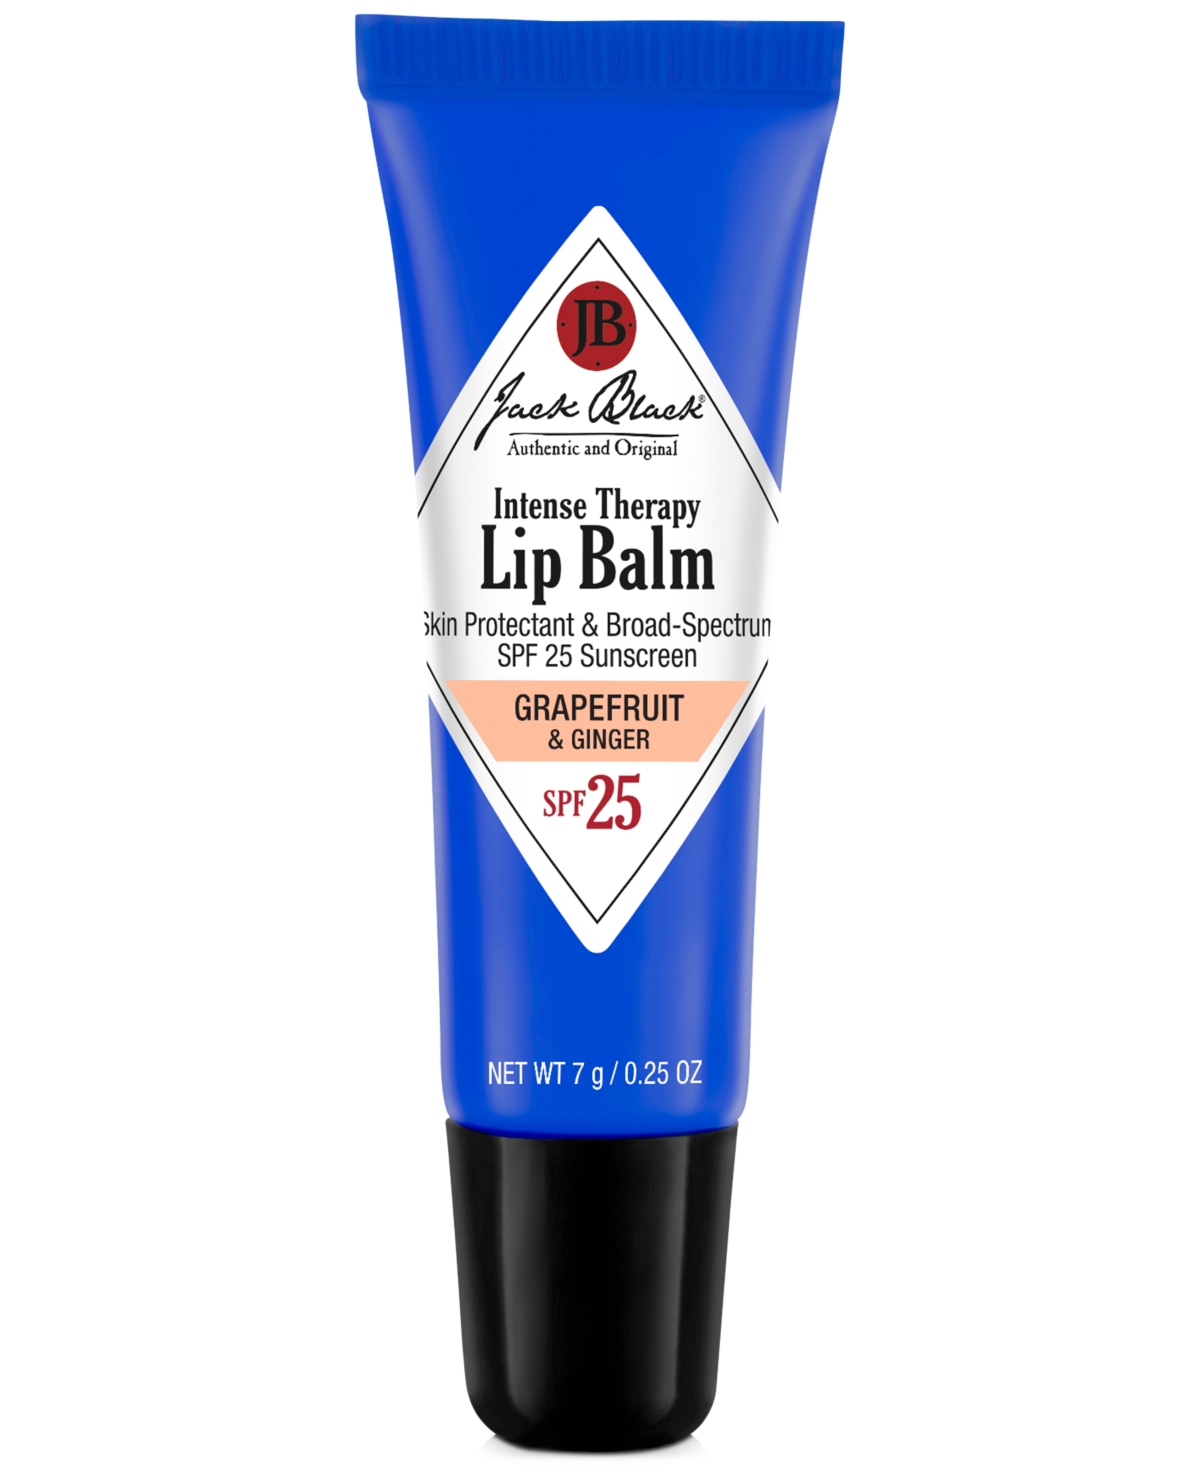 Intense Therapy Lip Balm Spf 25 with Grapefruit & Ginger, 0.25 oz